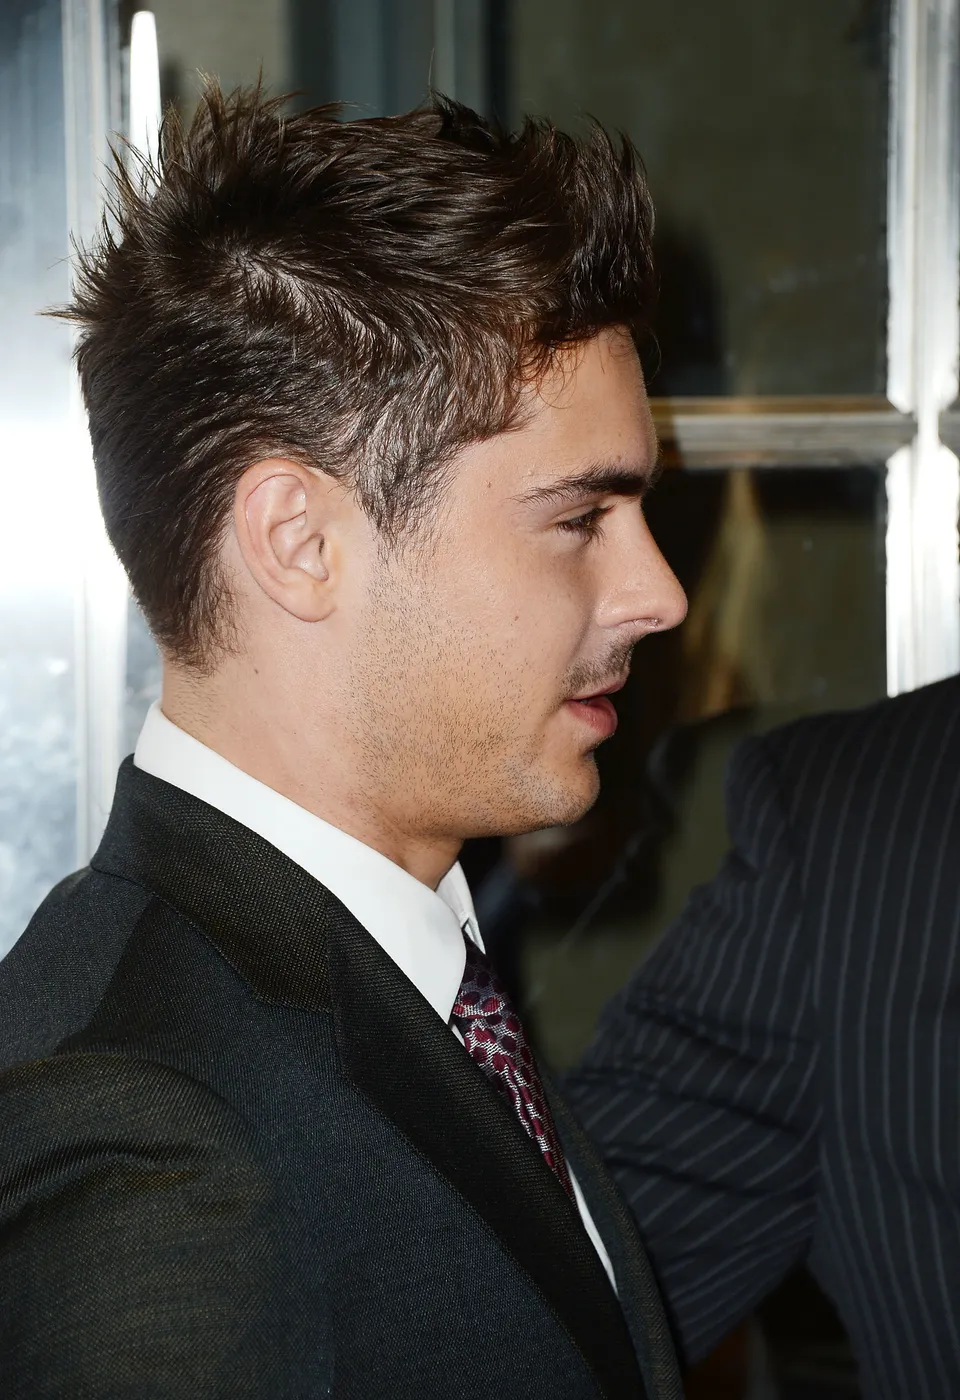 Show These Short Men S Hairstyles To Your Barber Huffpost Life